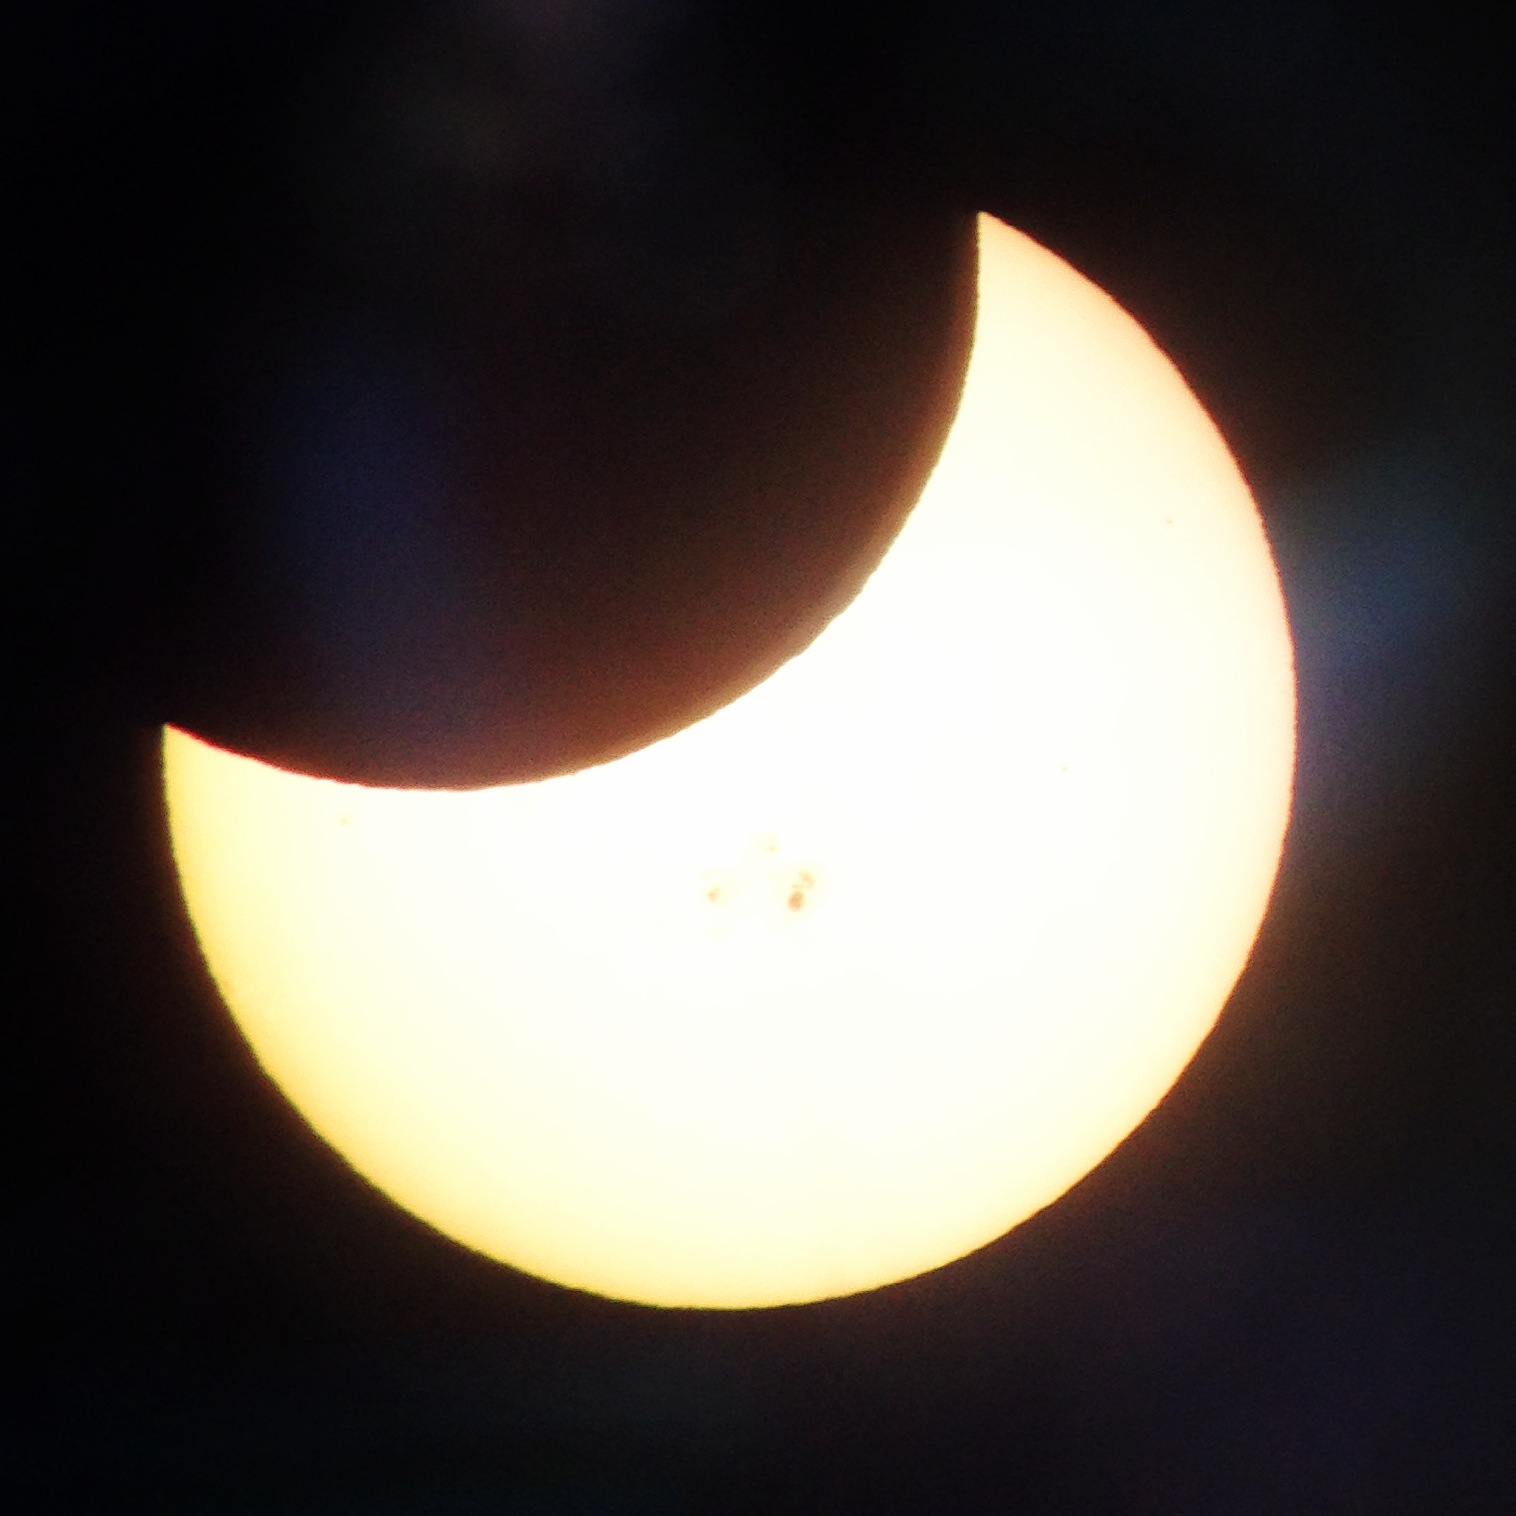 The moon obscured about 40 percent of the sun in Thursday's eclipse. (Courtesy of Shannon Rosa)